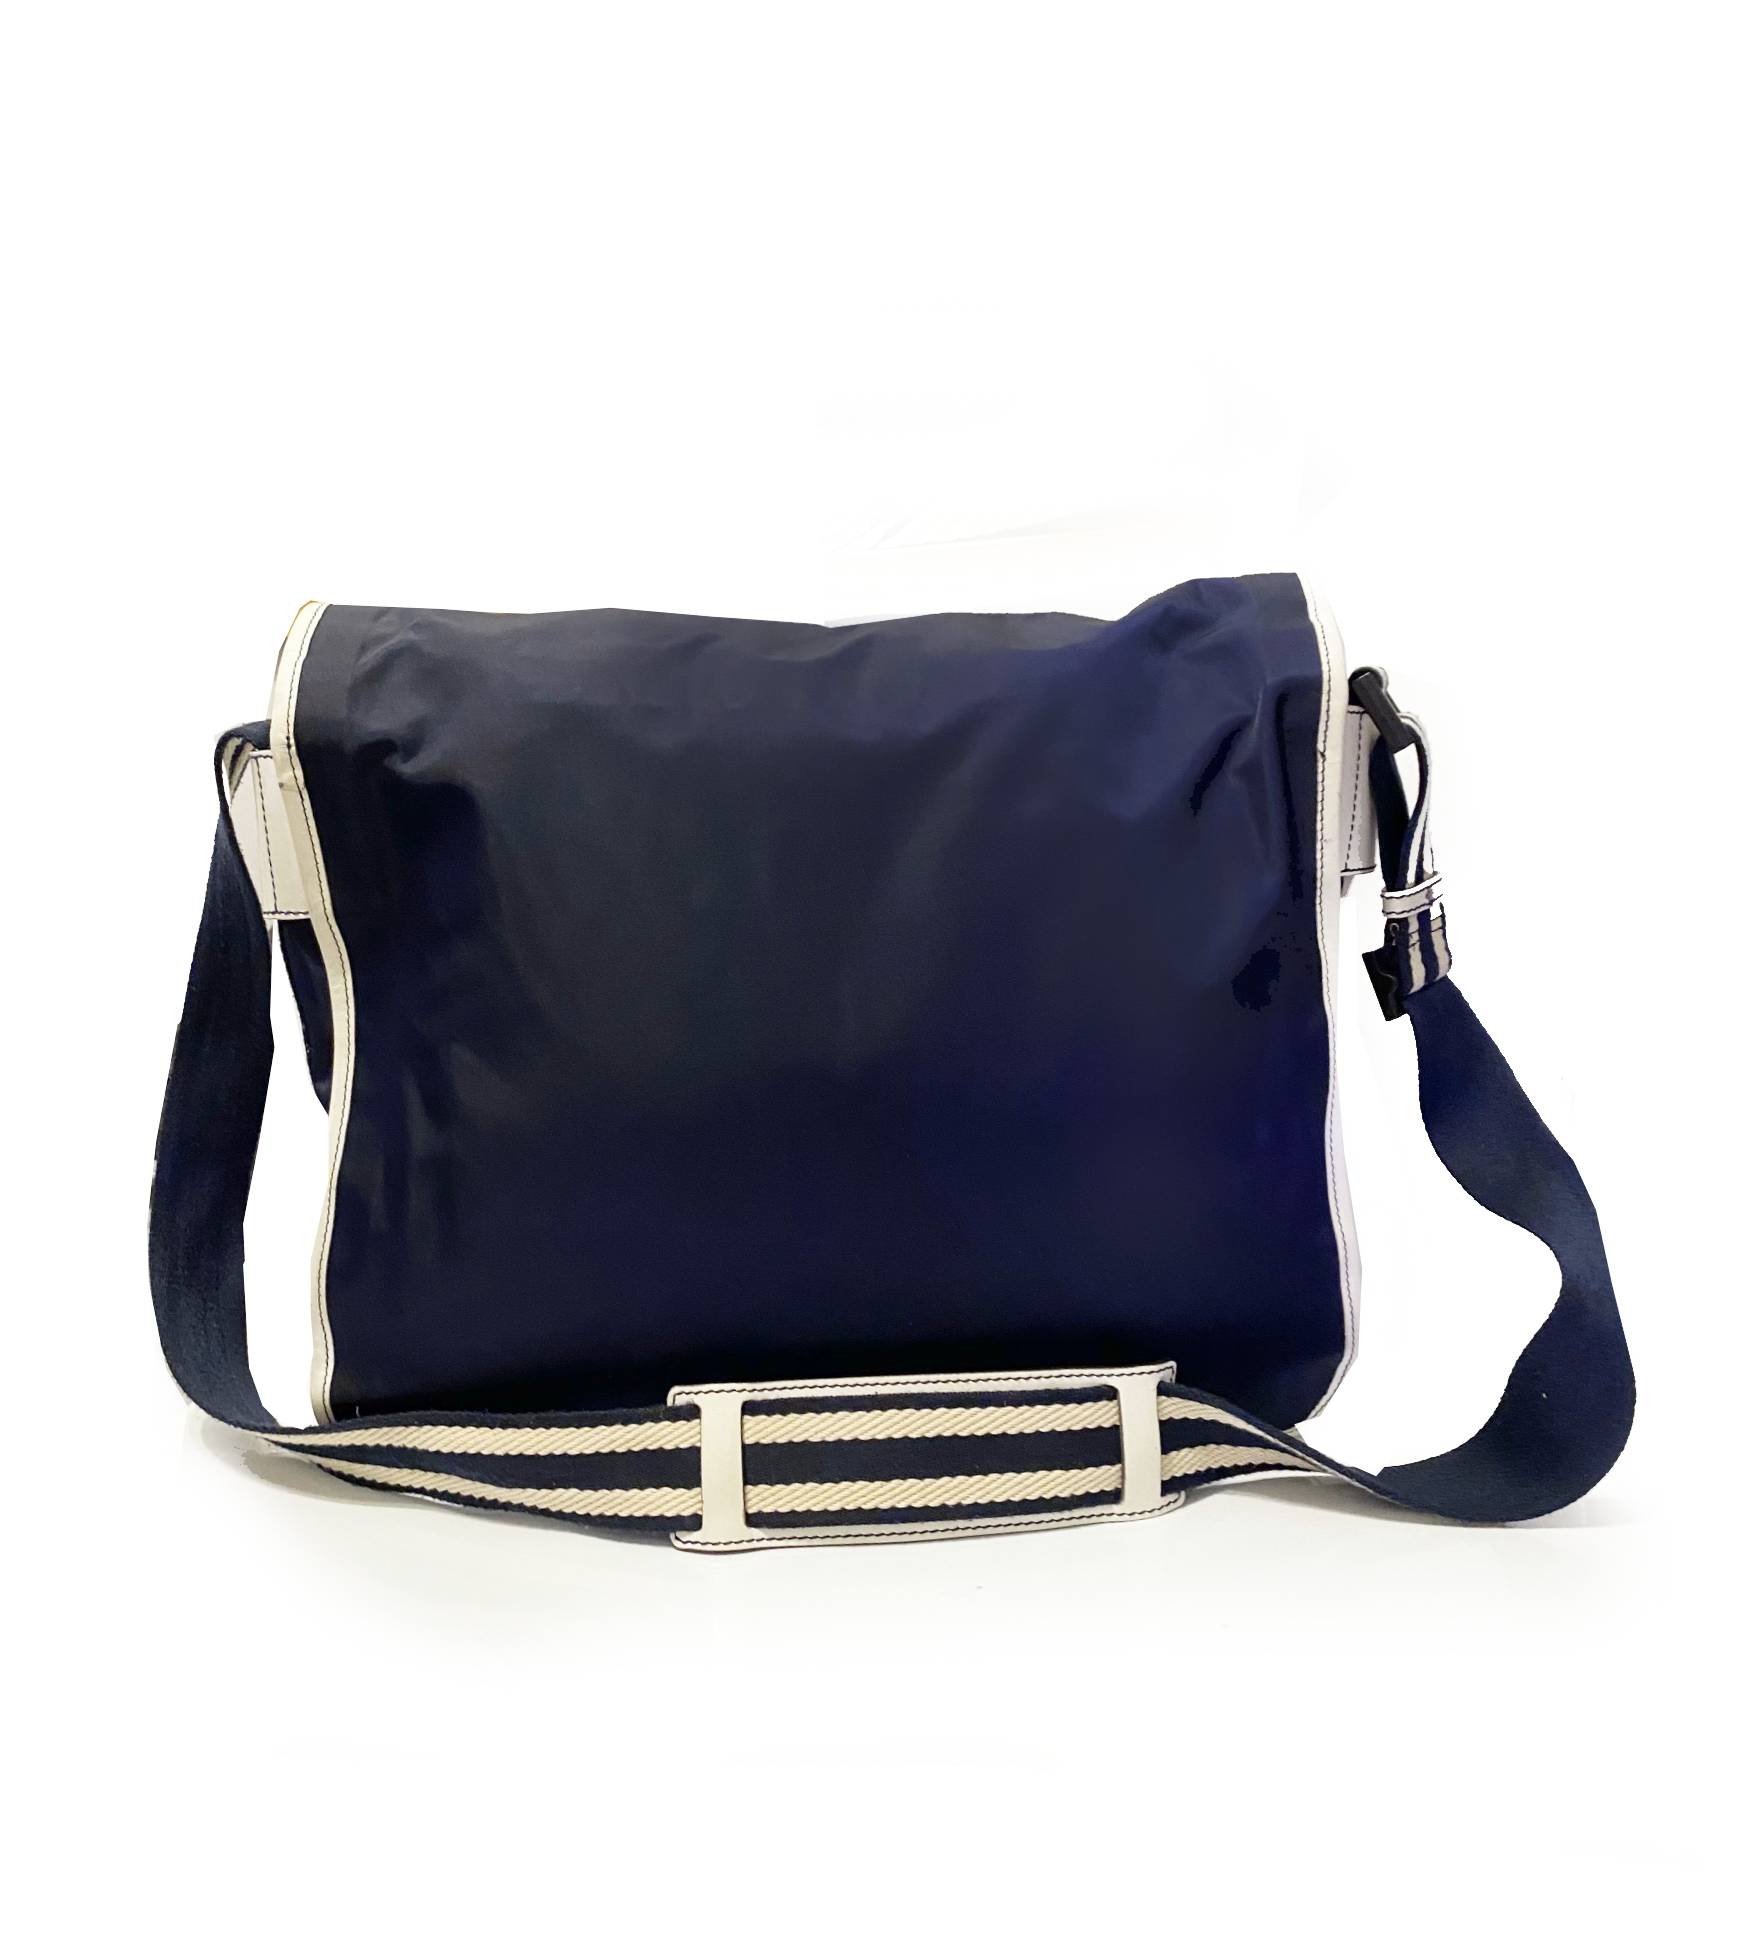 2000s Gucci Navy Canvas Crossbody messenger travel bag - style - CHNGR